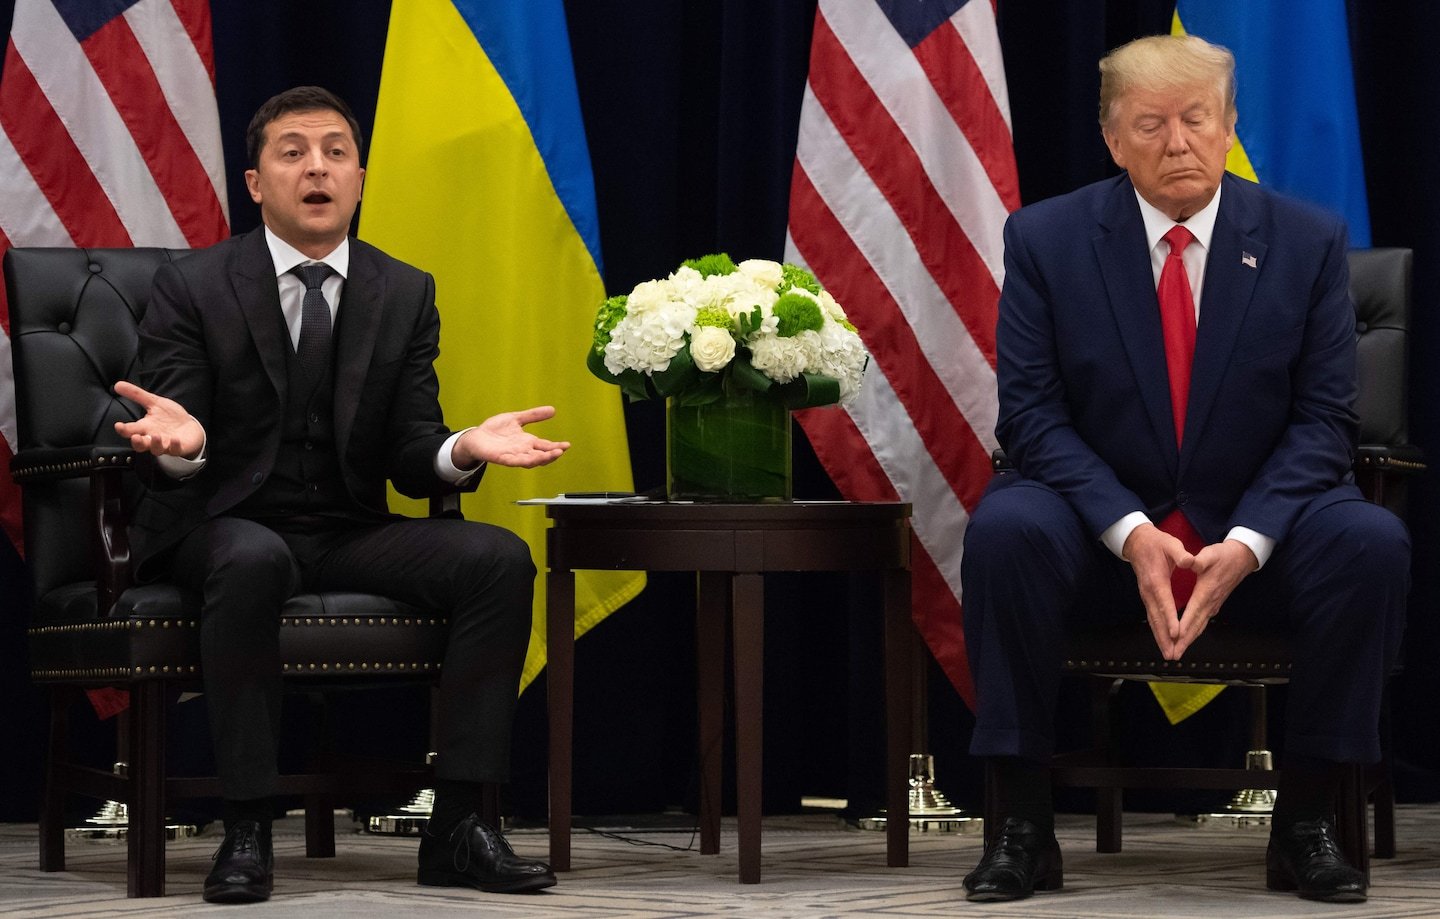 A presidential loathing for Ukraine is at the heart of the impeachment inquiry